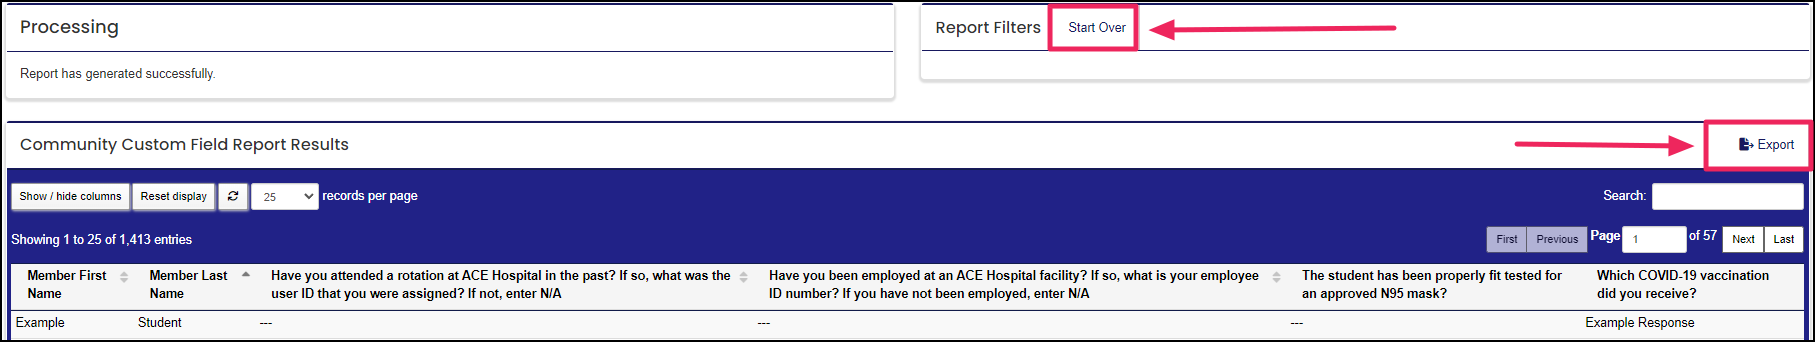 Image shows report results, export button, and start over button.